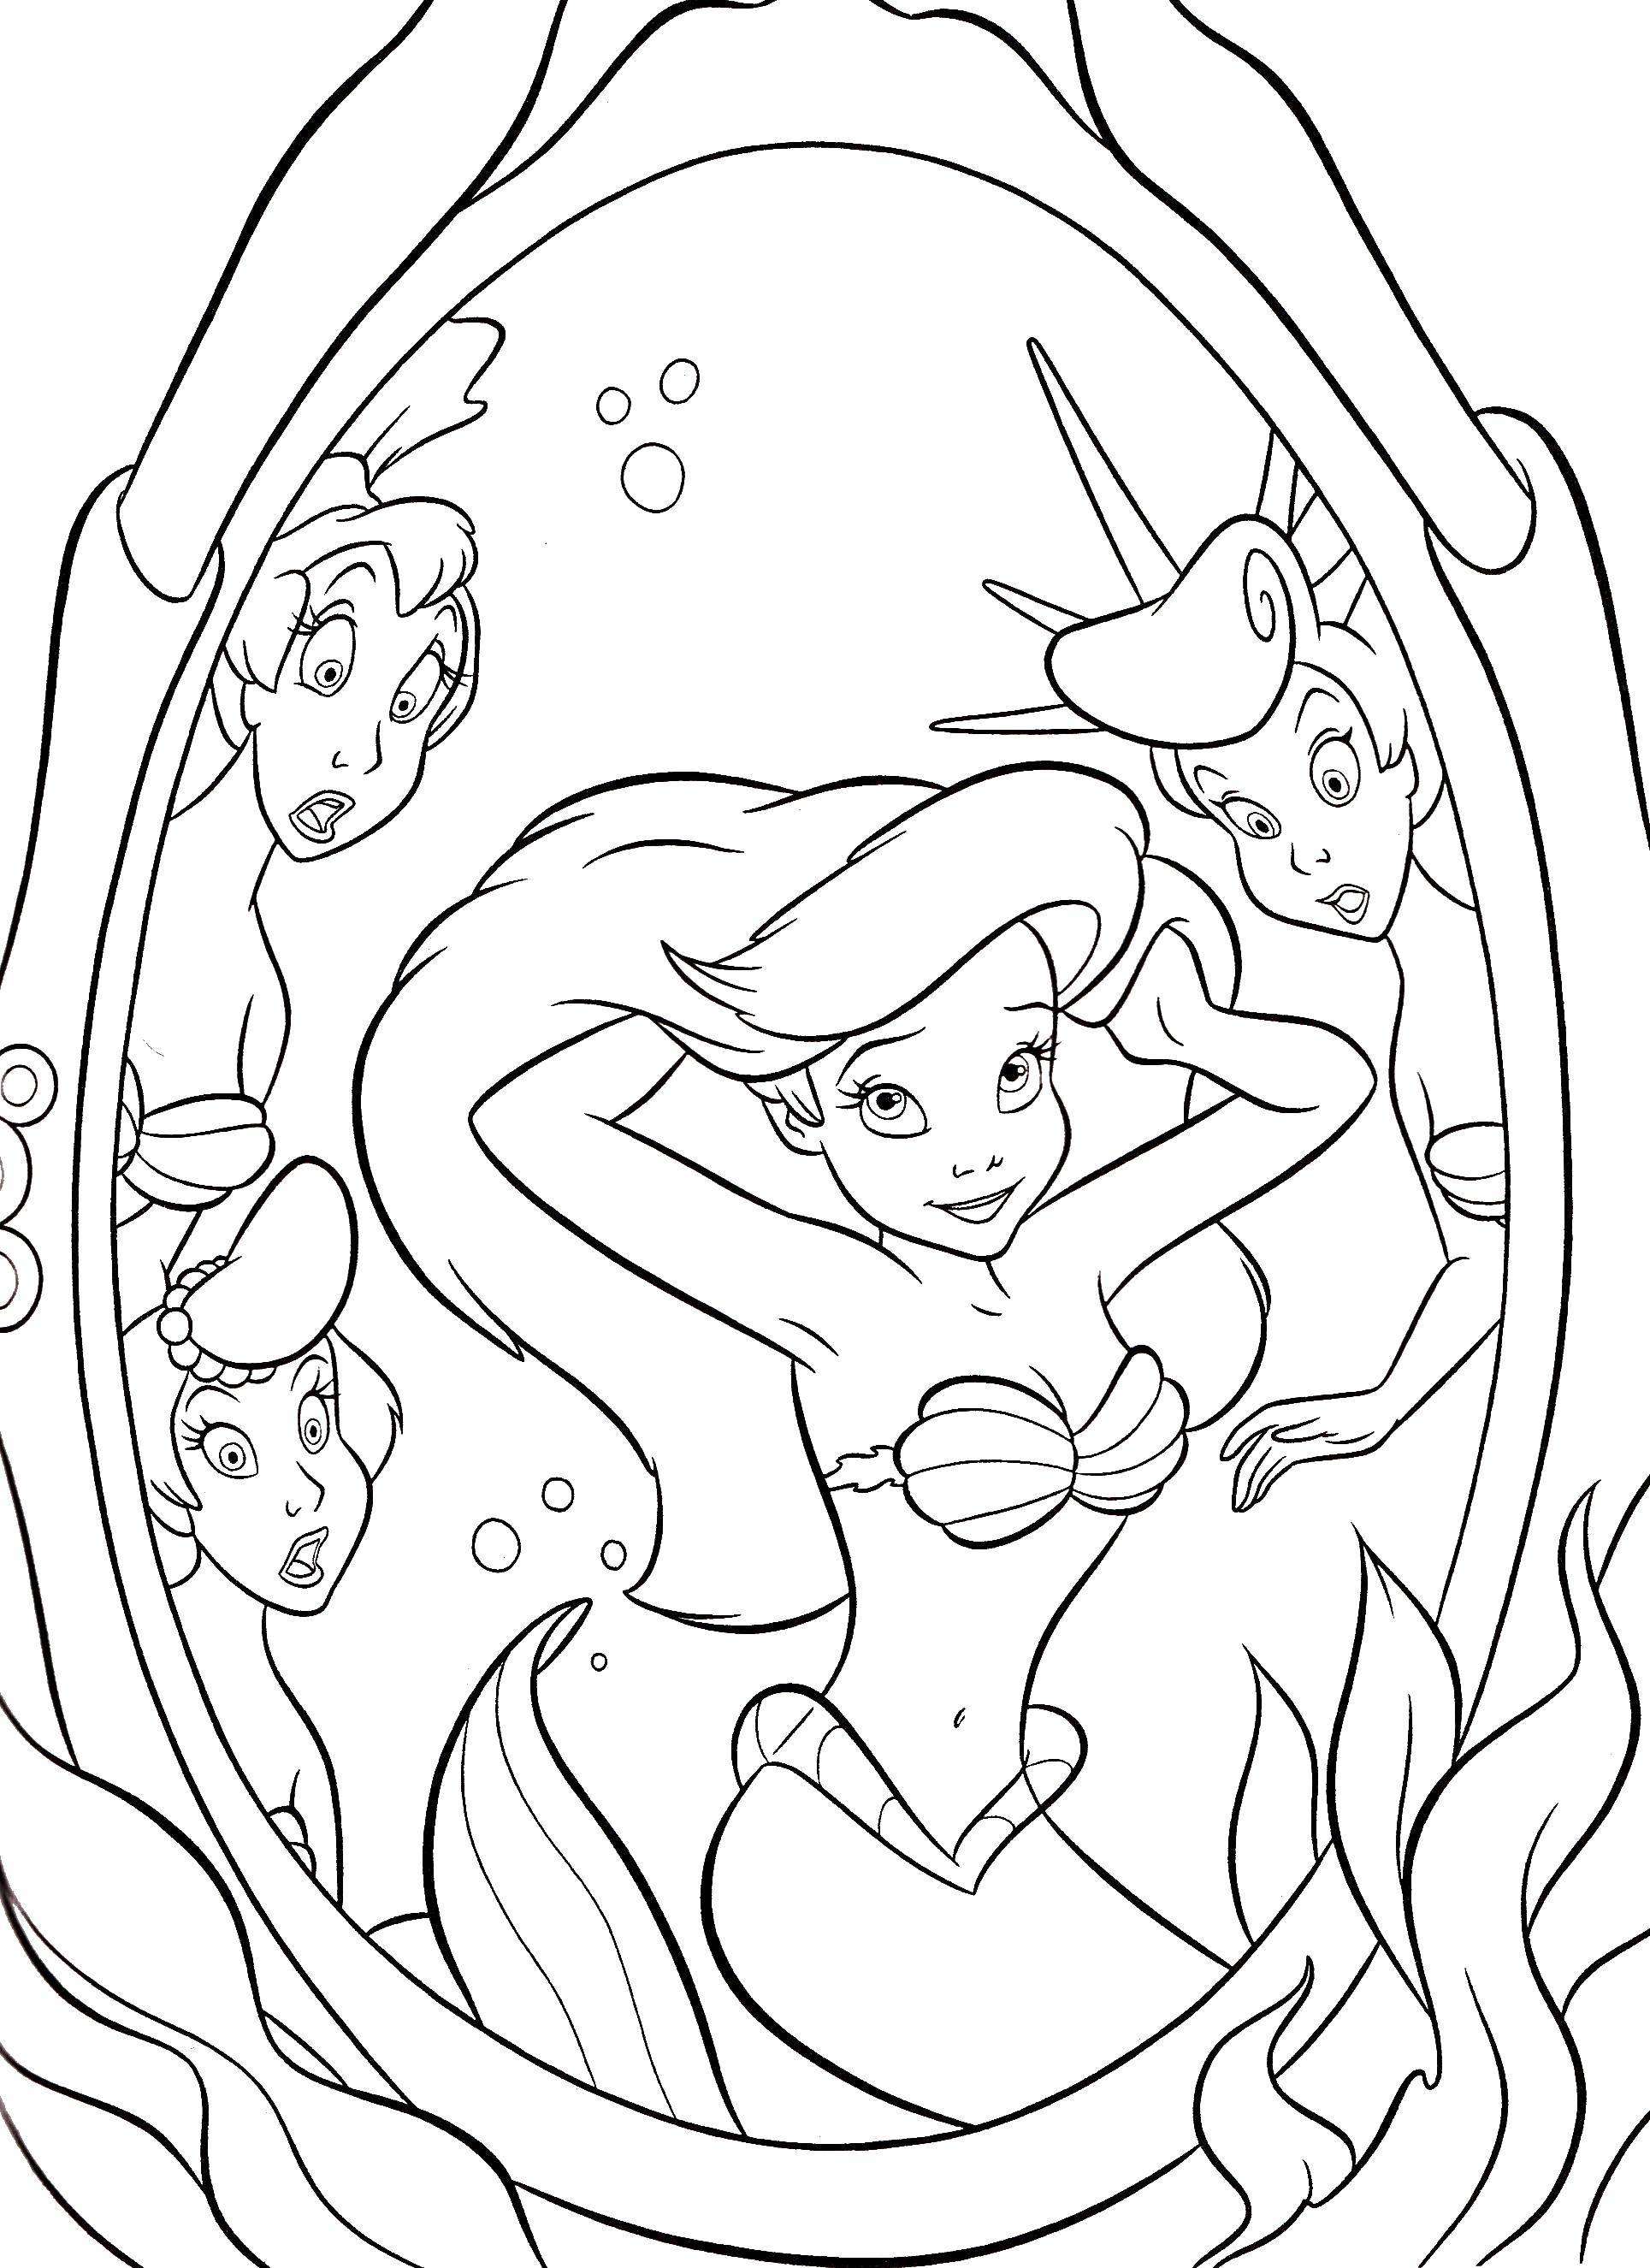 Coloring The little mermaid Ariel the most beautiful. Category cartoons. Tags:  Disney, the little mermaid, Ariel.